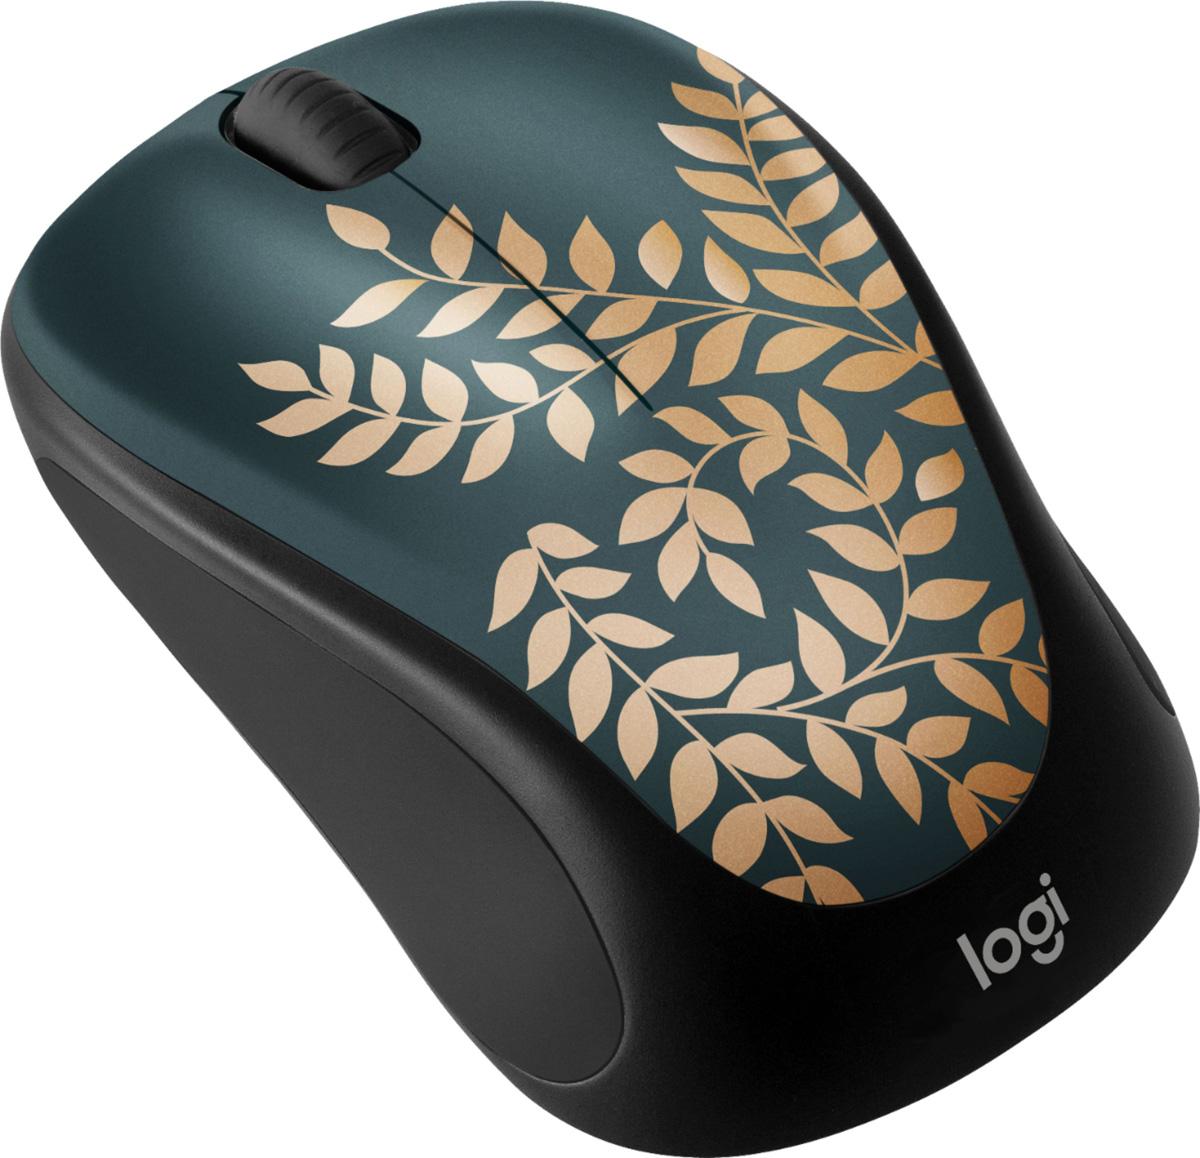 Logitech M325 Limited Edition Wireless Mouse for $9.99